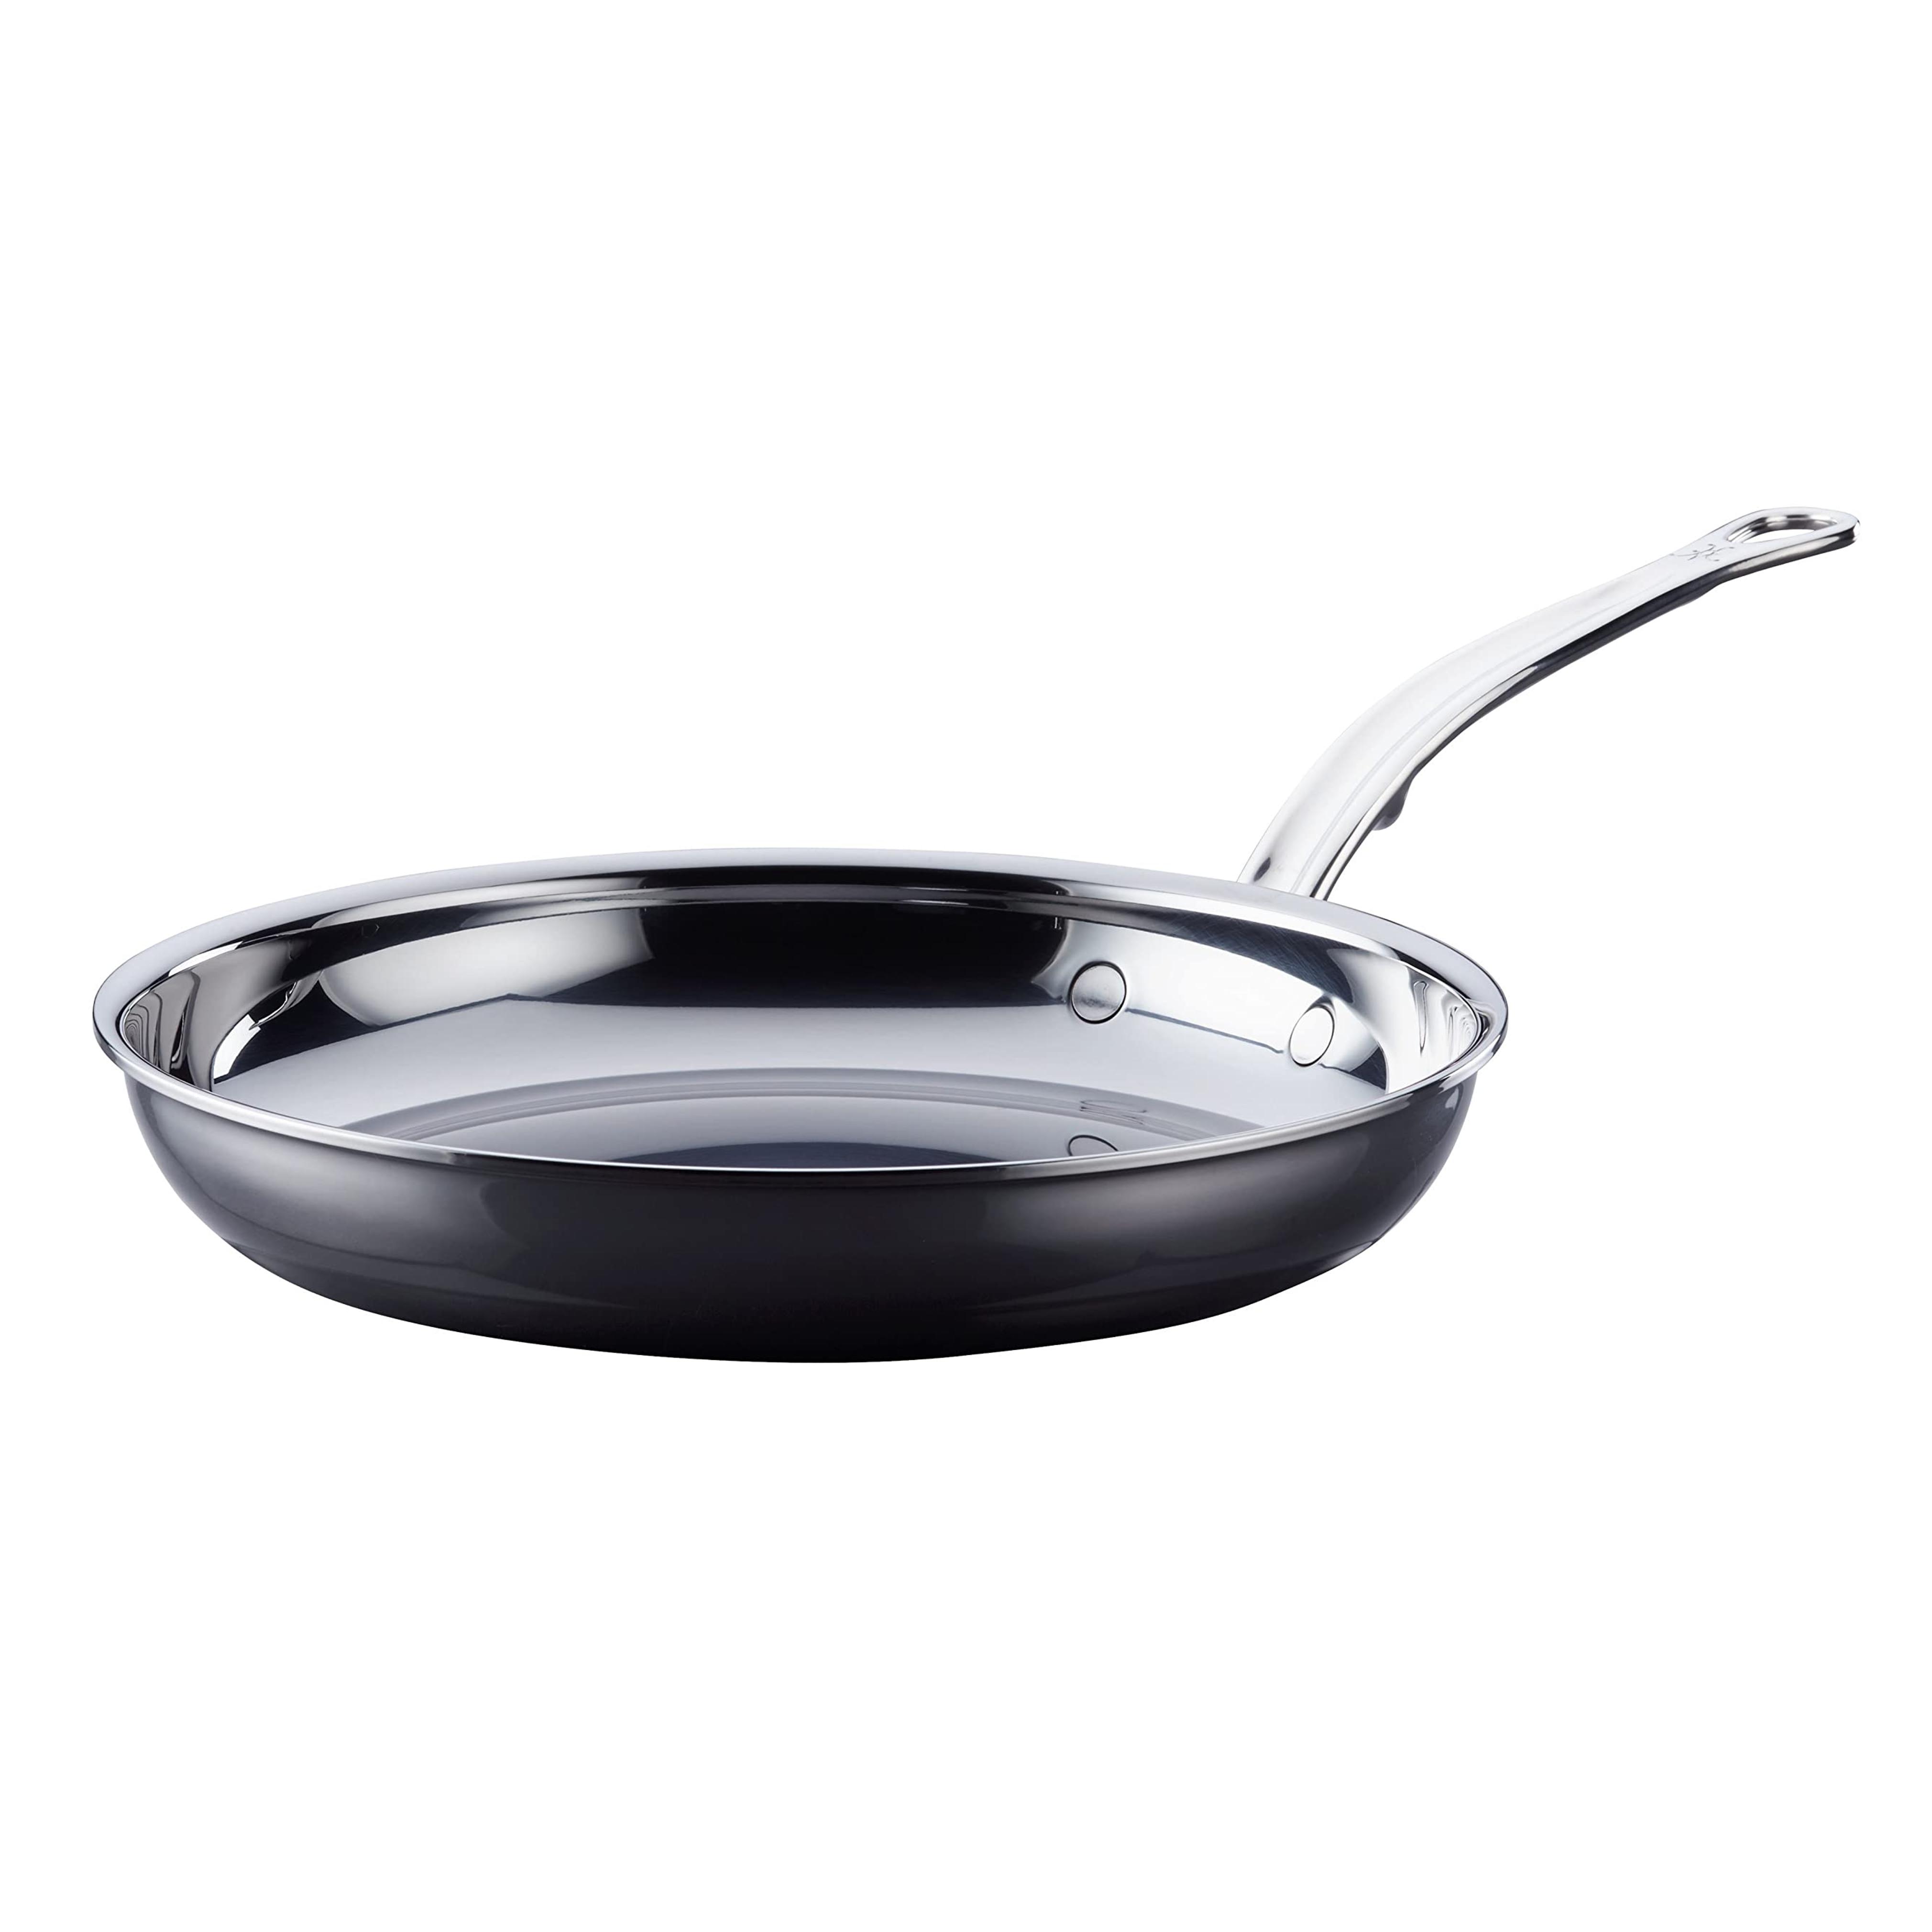 Hestan - NanoBond Collection - Stainless Steel Titanium Frying Pan, Induction Cooktop Compatible, 11-Inch